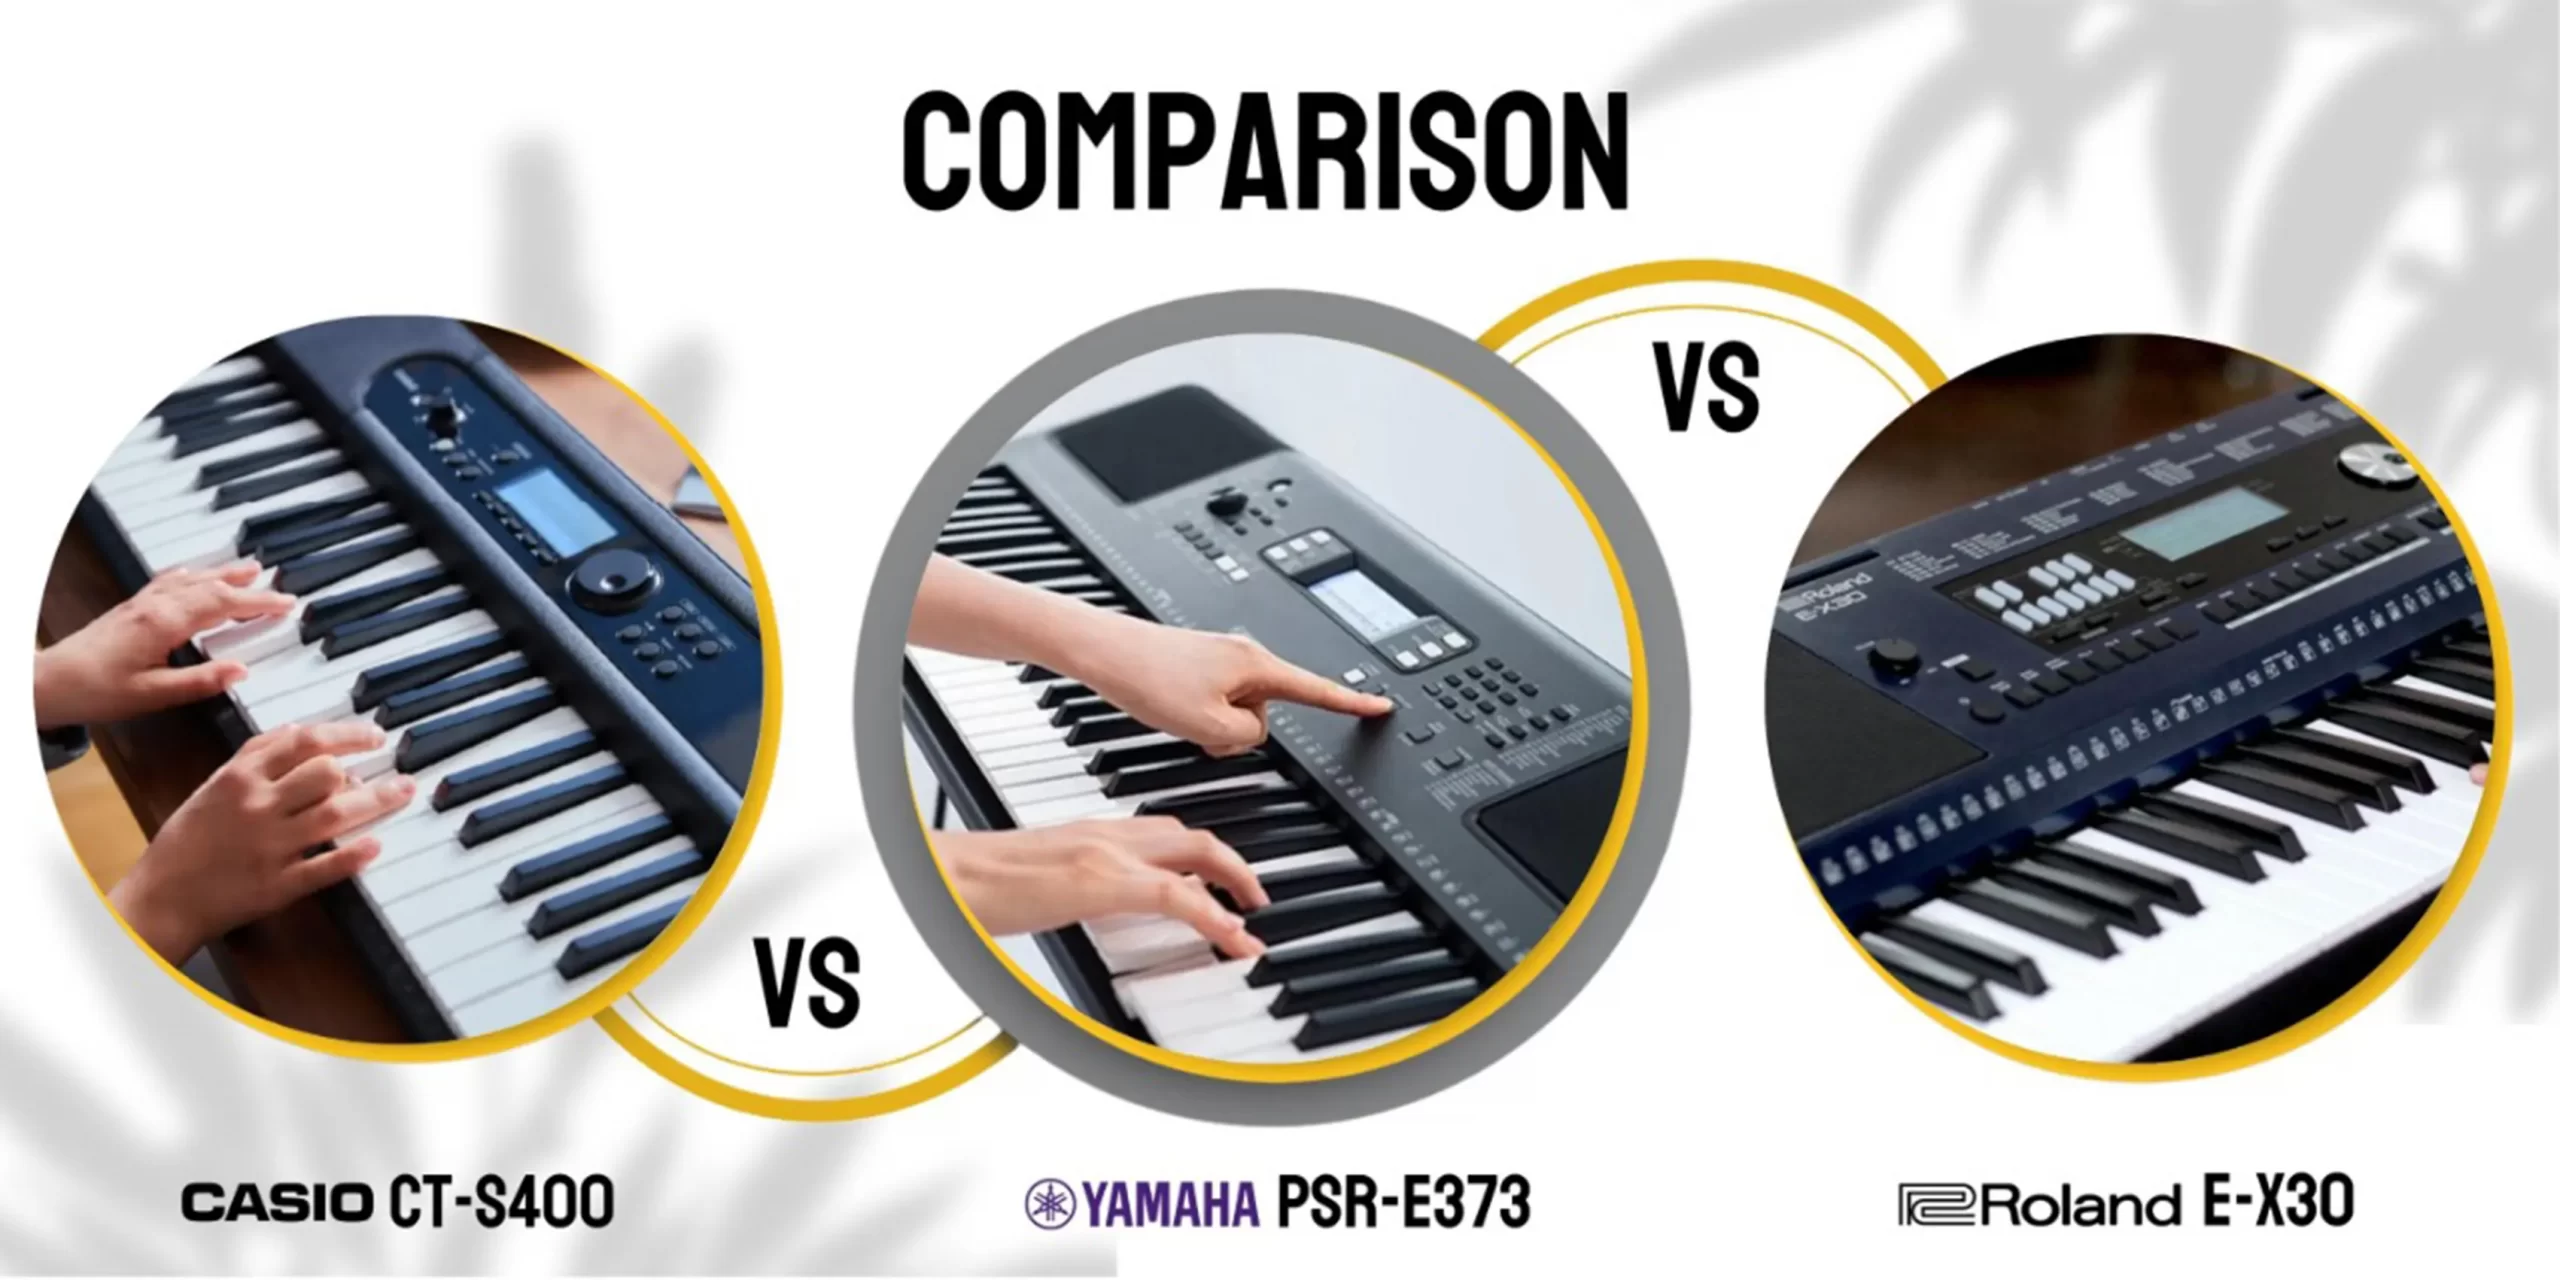 Casio CT-S400 vs Yamaha PSR-E373 vs Roland E-X30 Which One to Buy?